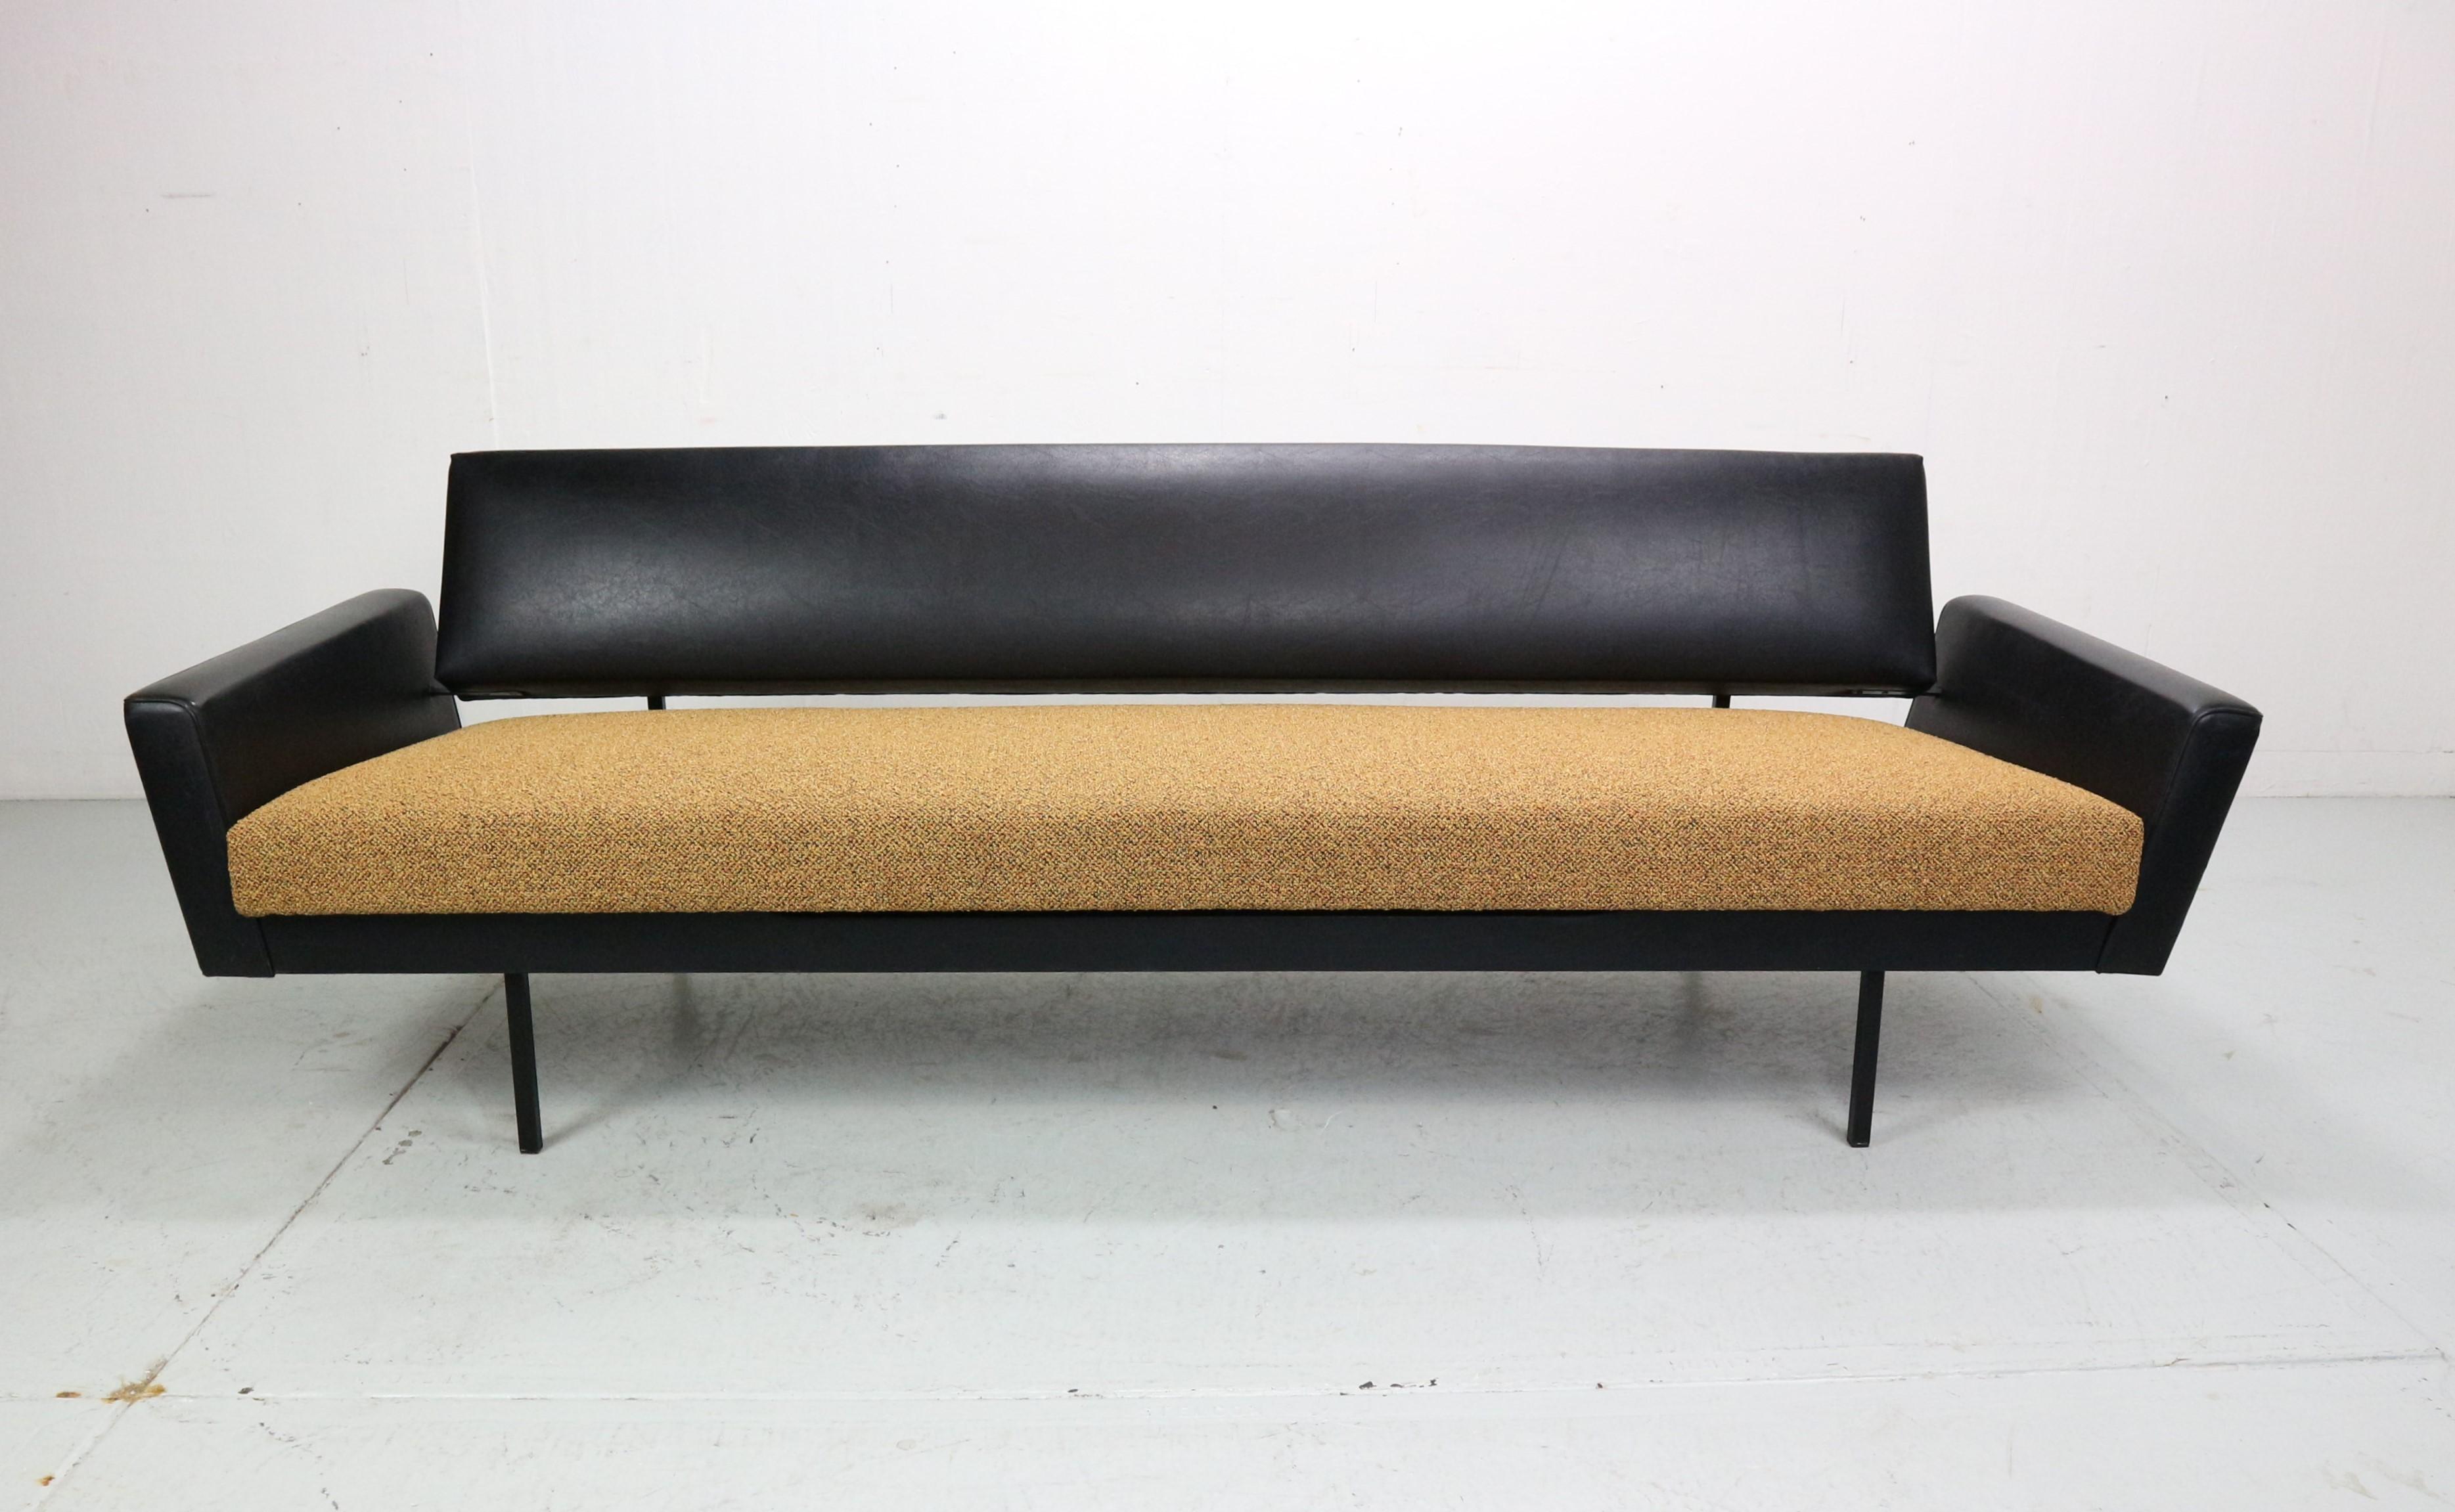 This sofa is designed by Rob Parry and produced by Gelderland. This specific design with upholstered armrests is quite rare. The seating part of the sofa can easily be pulled into a flat position that makes it comfortable to rest on for a little nap